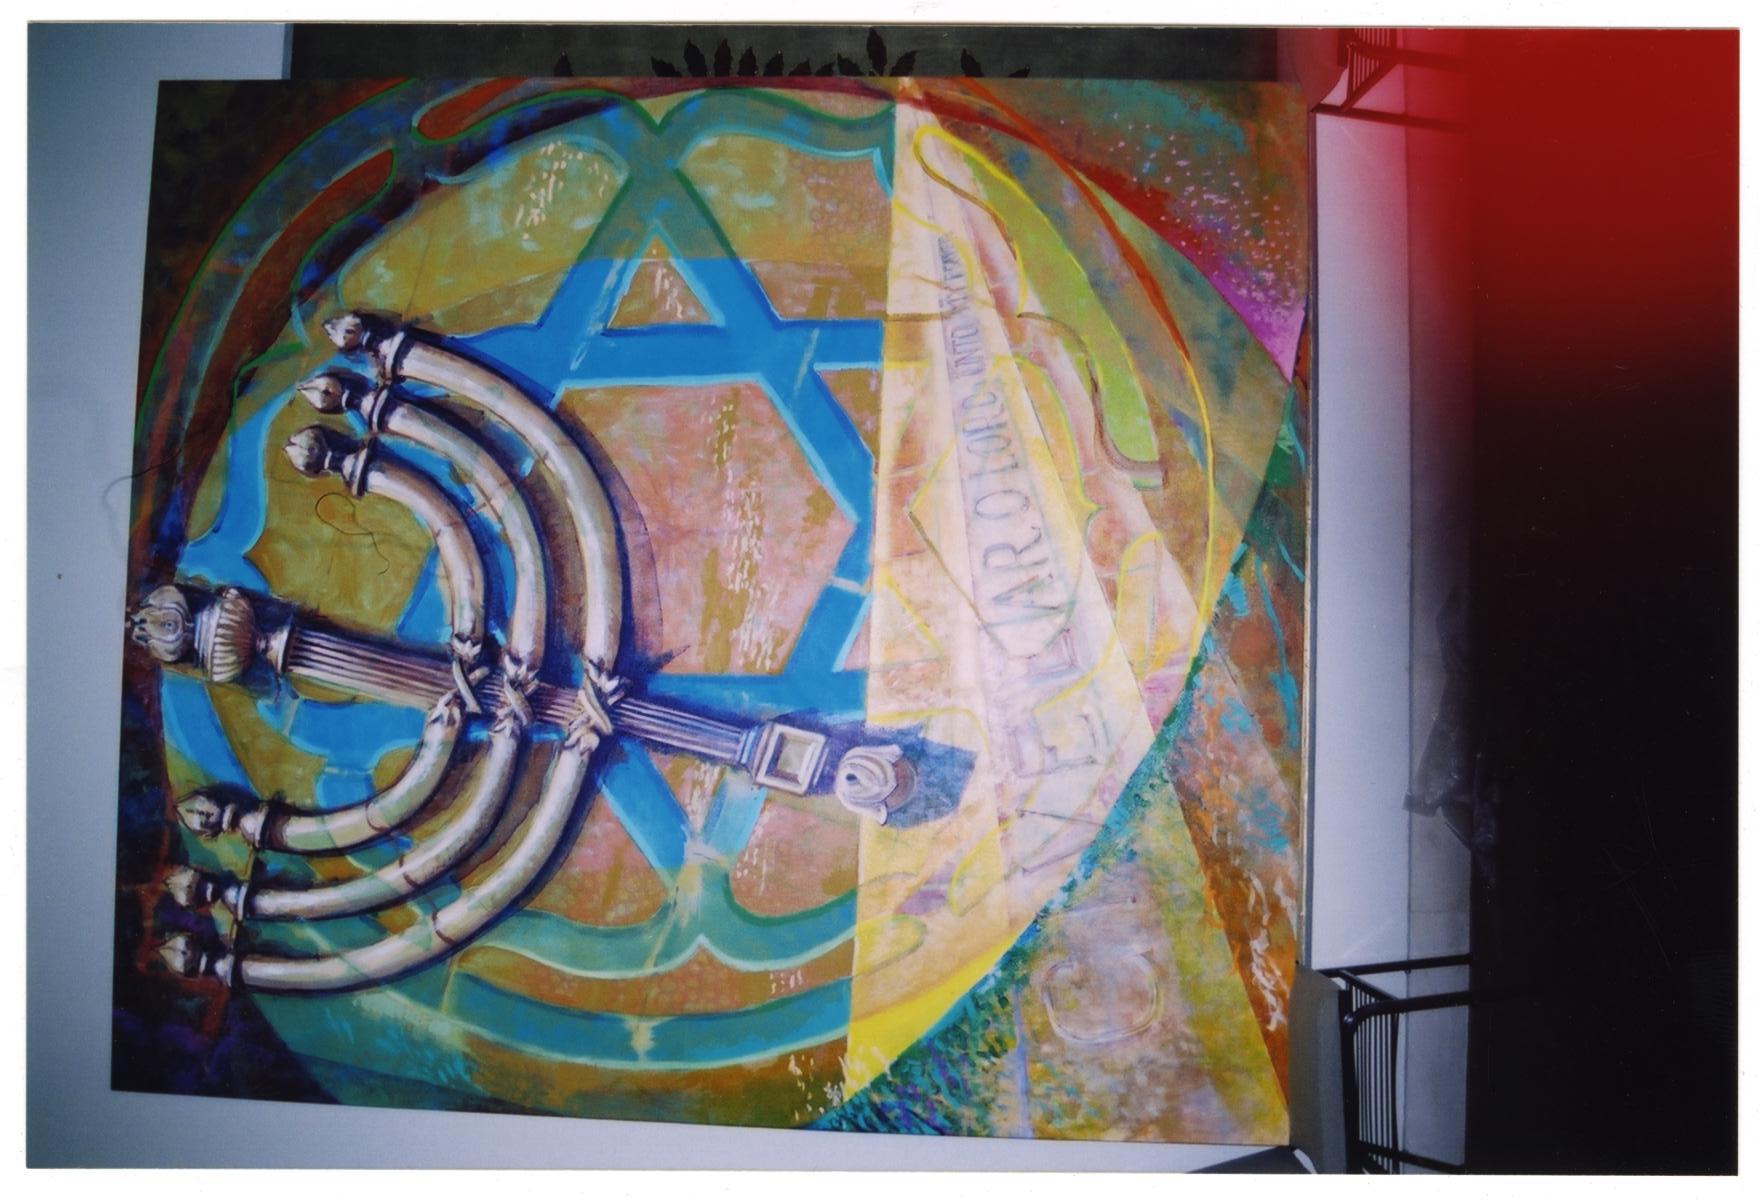 [Painting #2, montage of ritual images at Beth-El]
                                                
                                                    [Sequence #]: 1 of 1
                                                